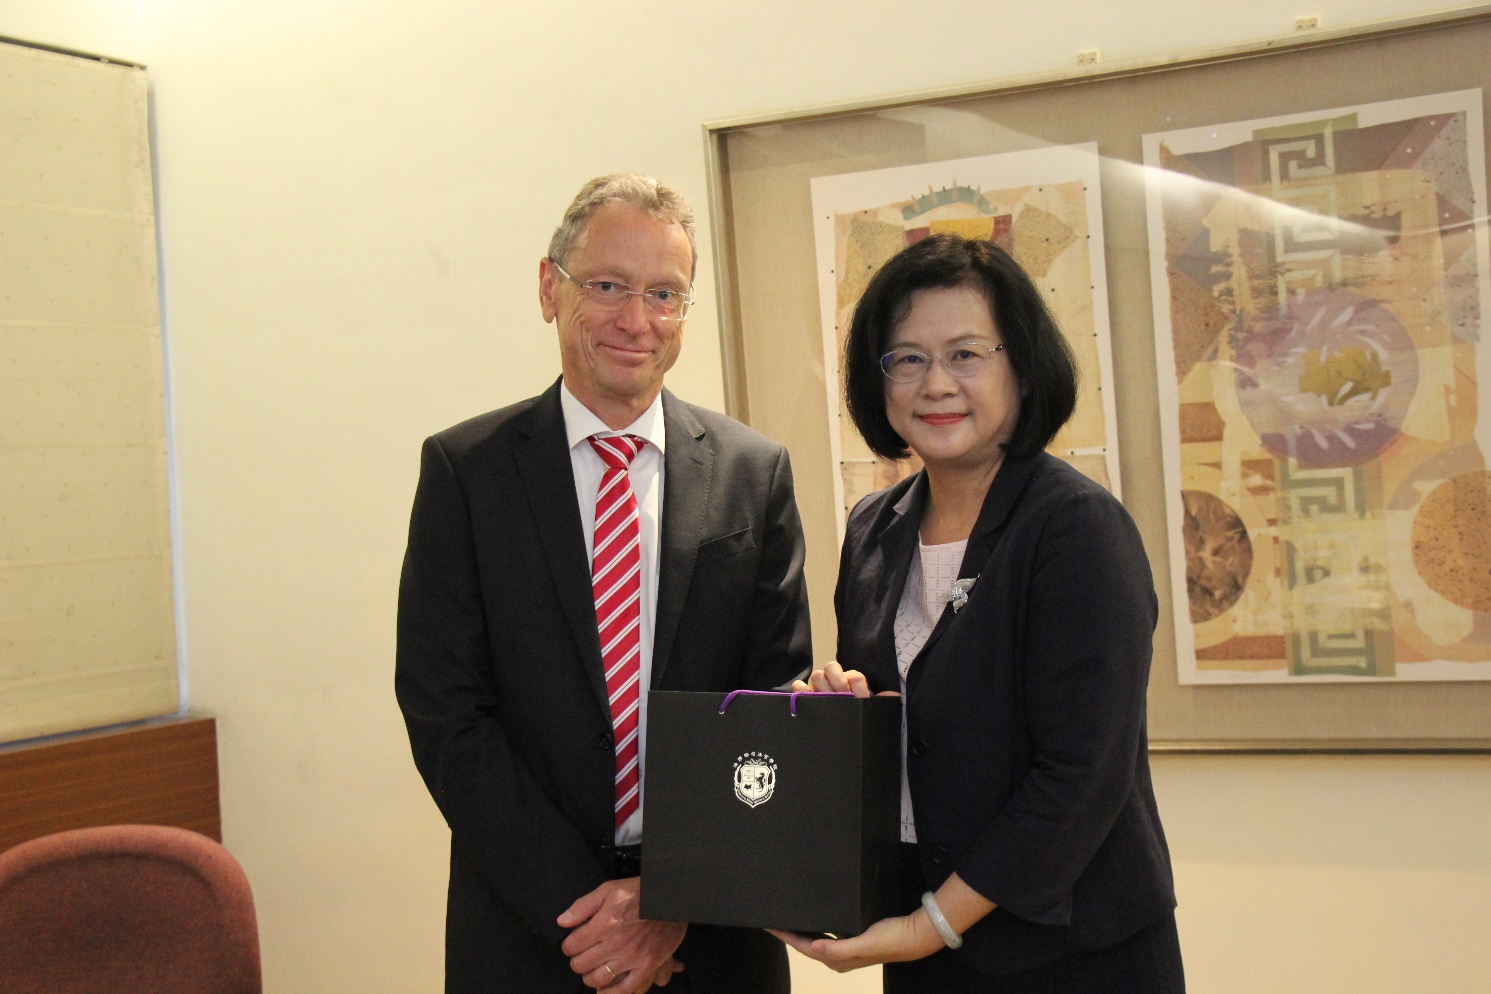 After the signing, Tsai Pi-Yu presented a gift to Dr. Jürgen Brauer, Head of Prosecutors in Germany.